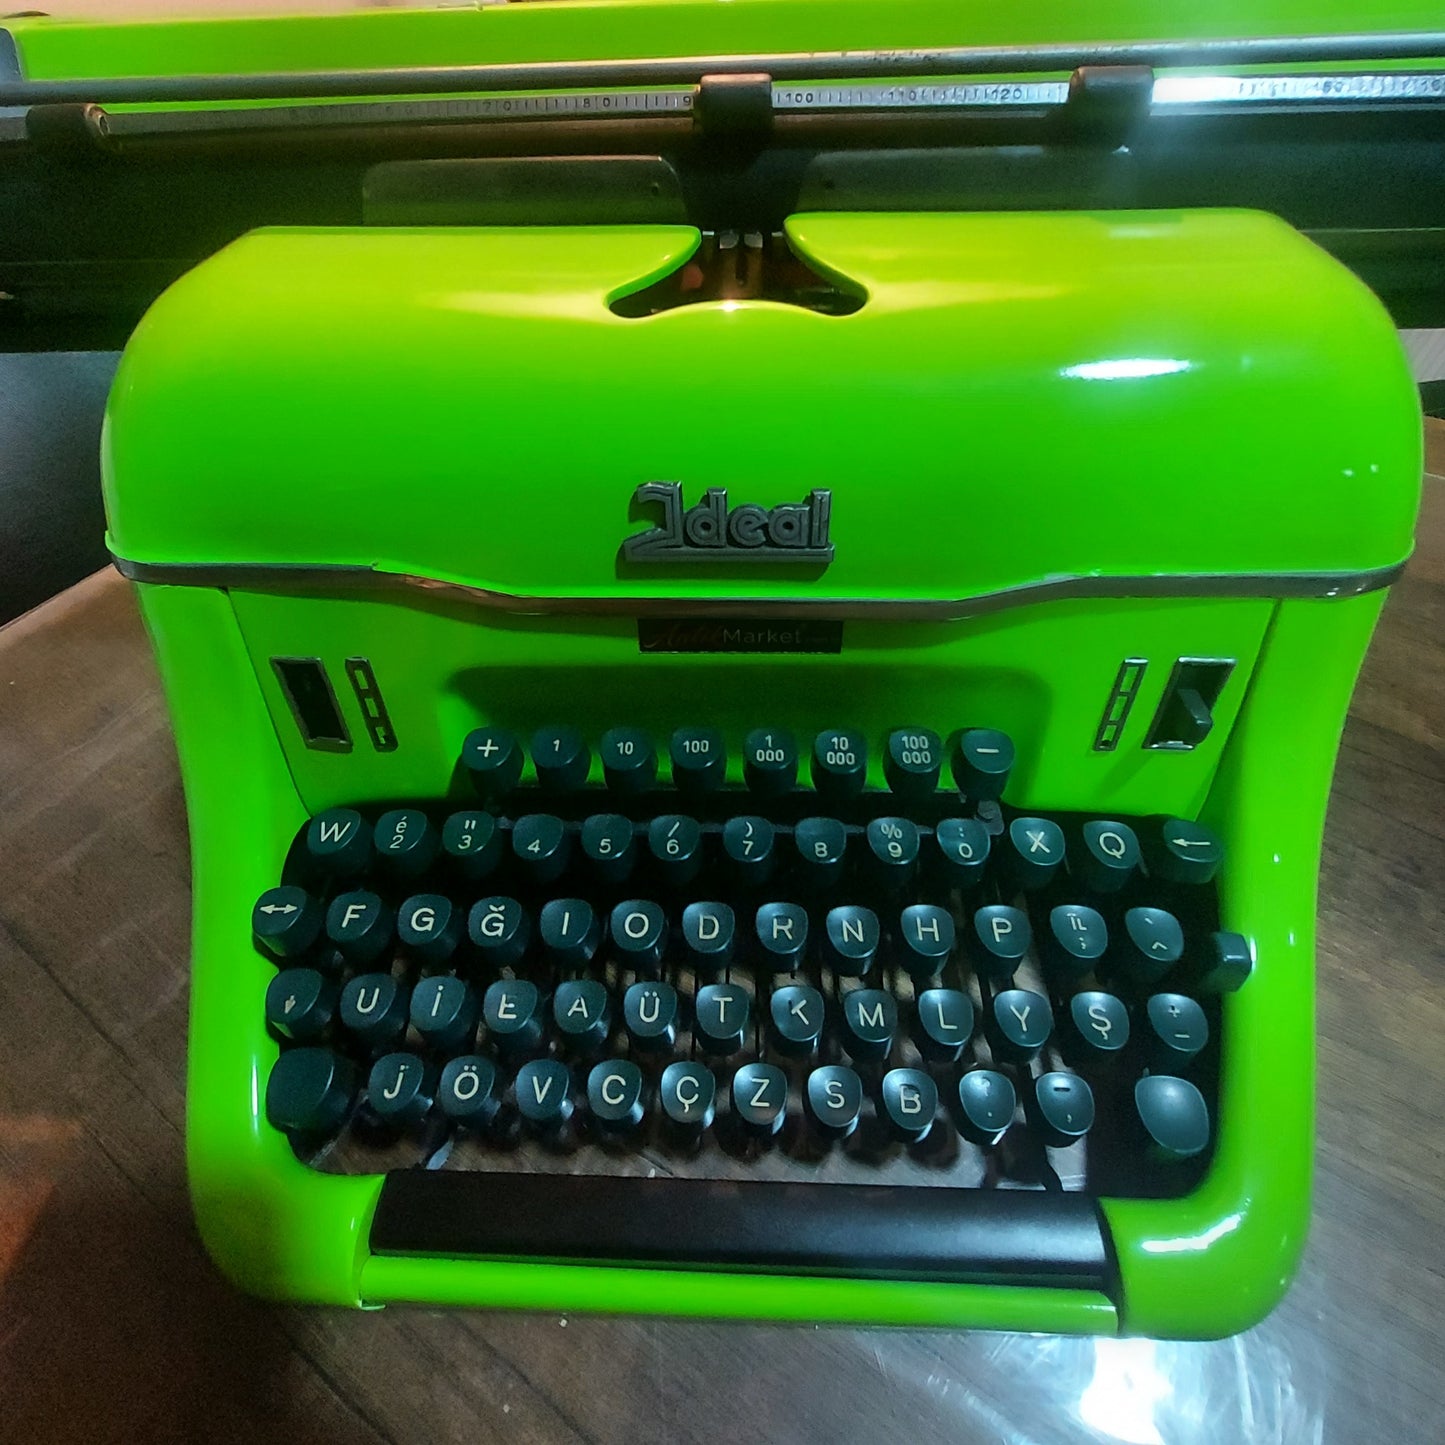 A magnificent 1955 model IDEAL antique pistachio green typewriter